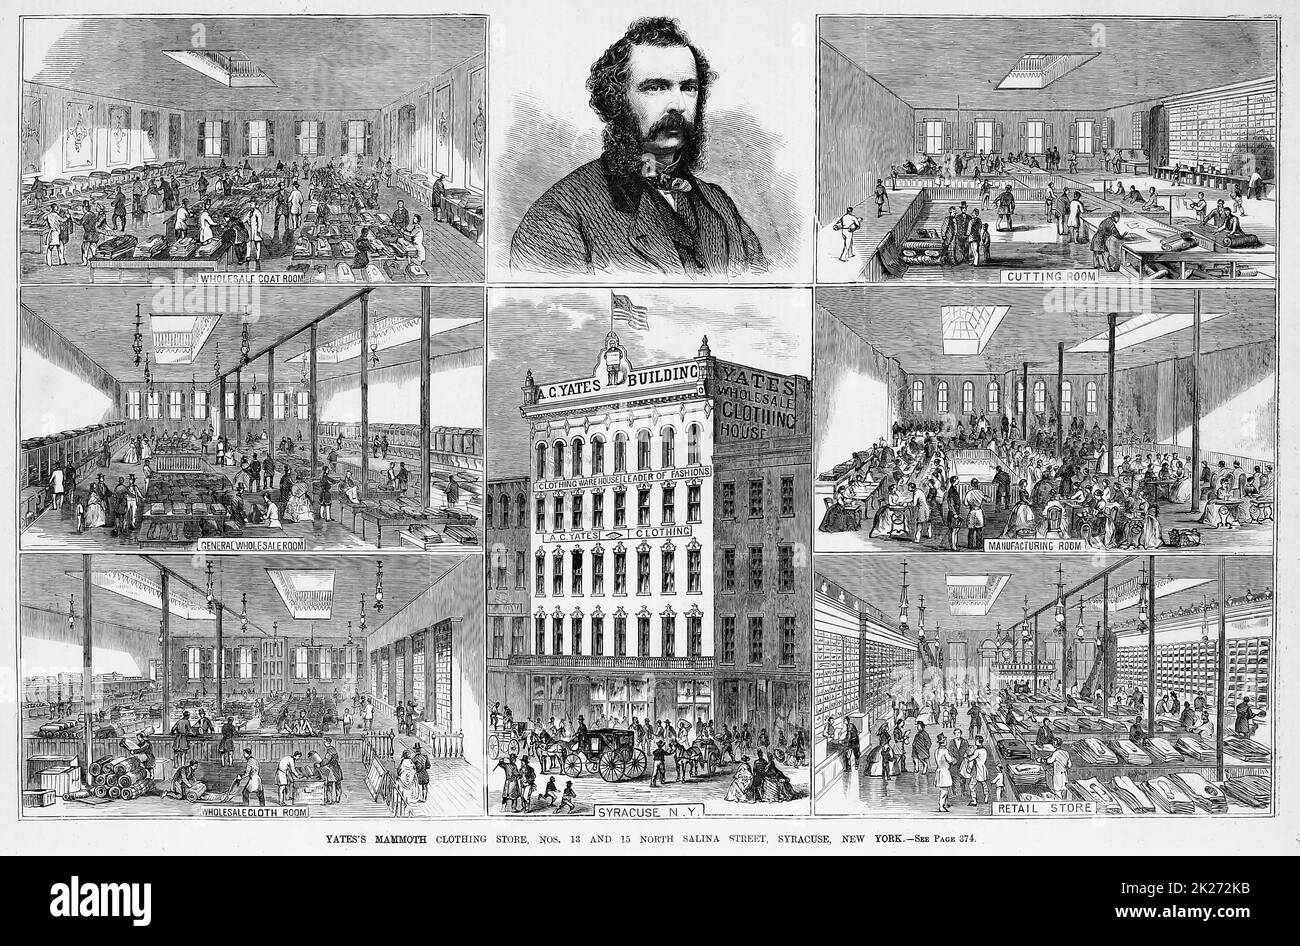 A. C. Yates' Mammoth Clothing Store, Nos. 13 and 15 North Salina Street, Syracuse, New York - Wholesale Coat Room, Cutting Room, General Wholesale Room, Wholesale Cloth Room, Manufacturing Room, Retail Store. April 1862. 19th century American Civil War illustration from Frank Leslie's Illustrated Newspaper Stock Photo